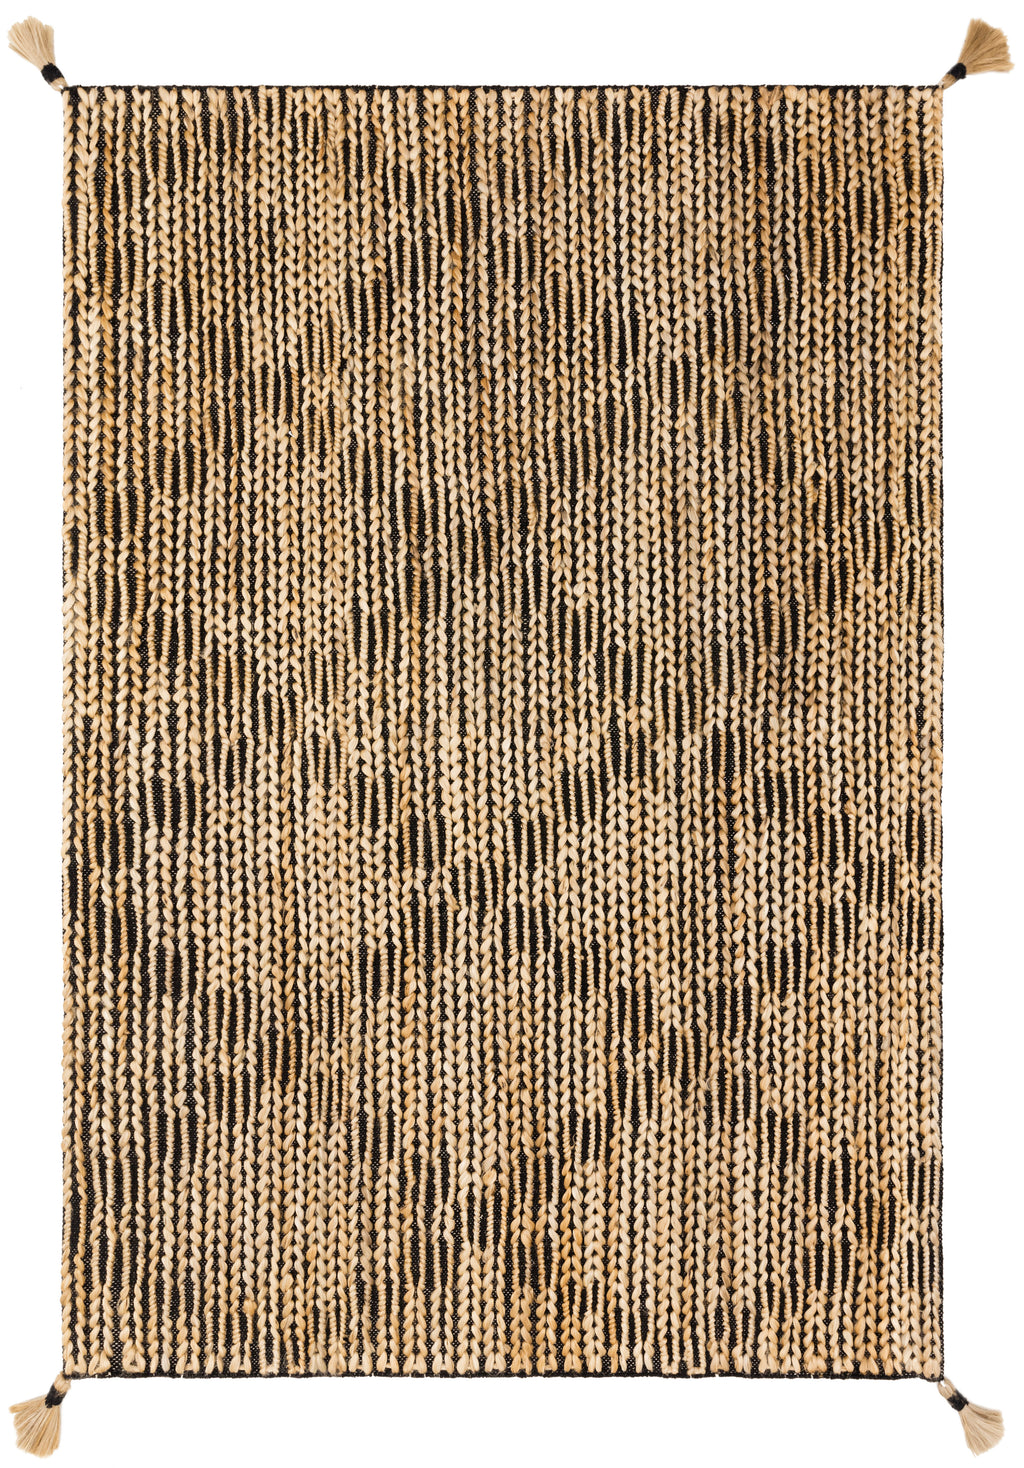 PLAYA Collection Rug  in  BLACK / NATURAL Black Accent Hand-Woven Viscose